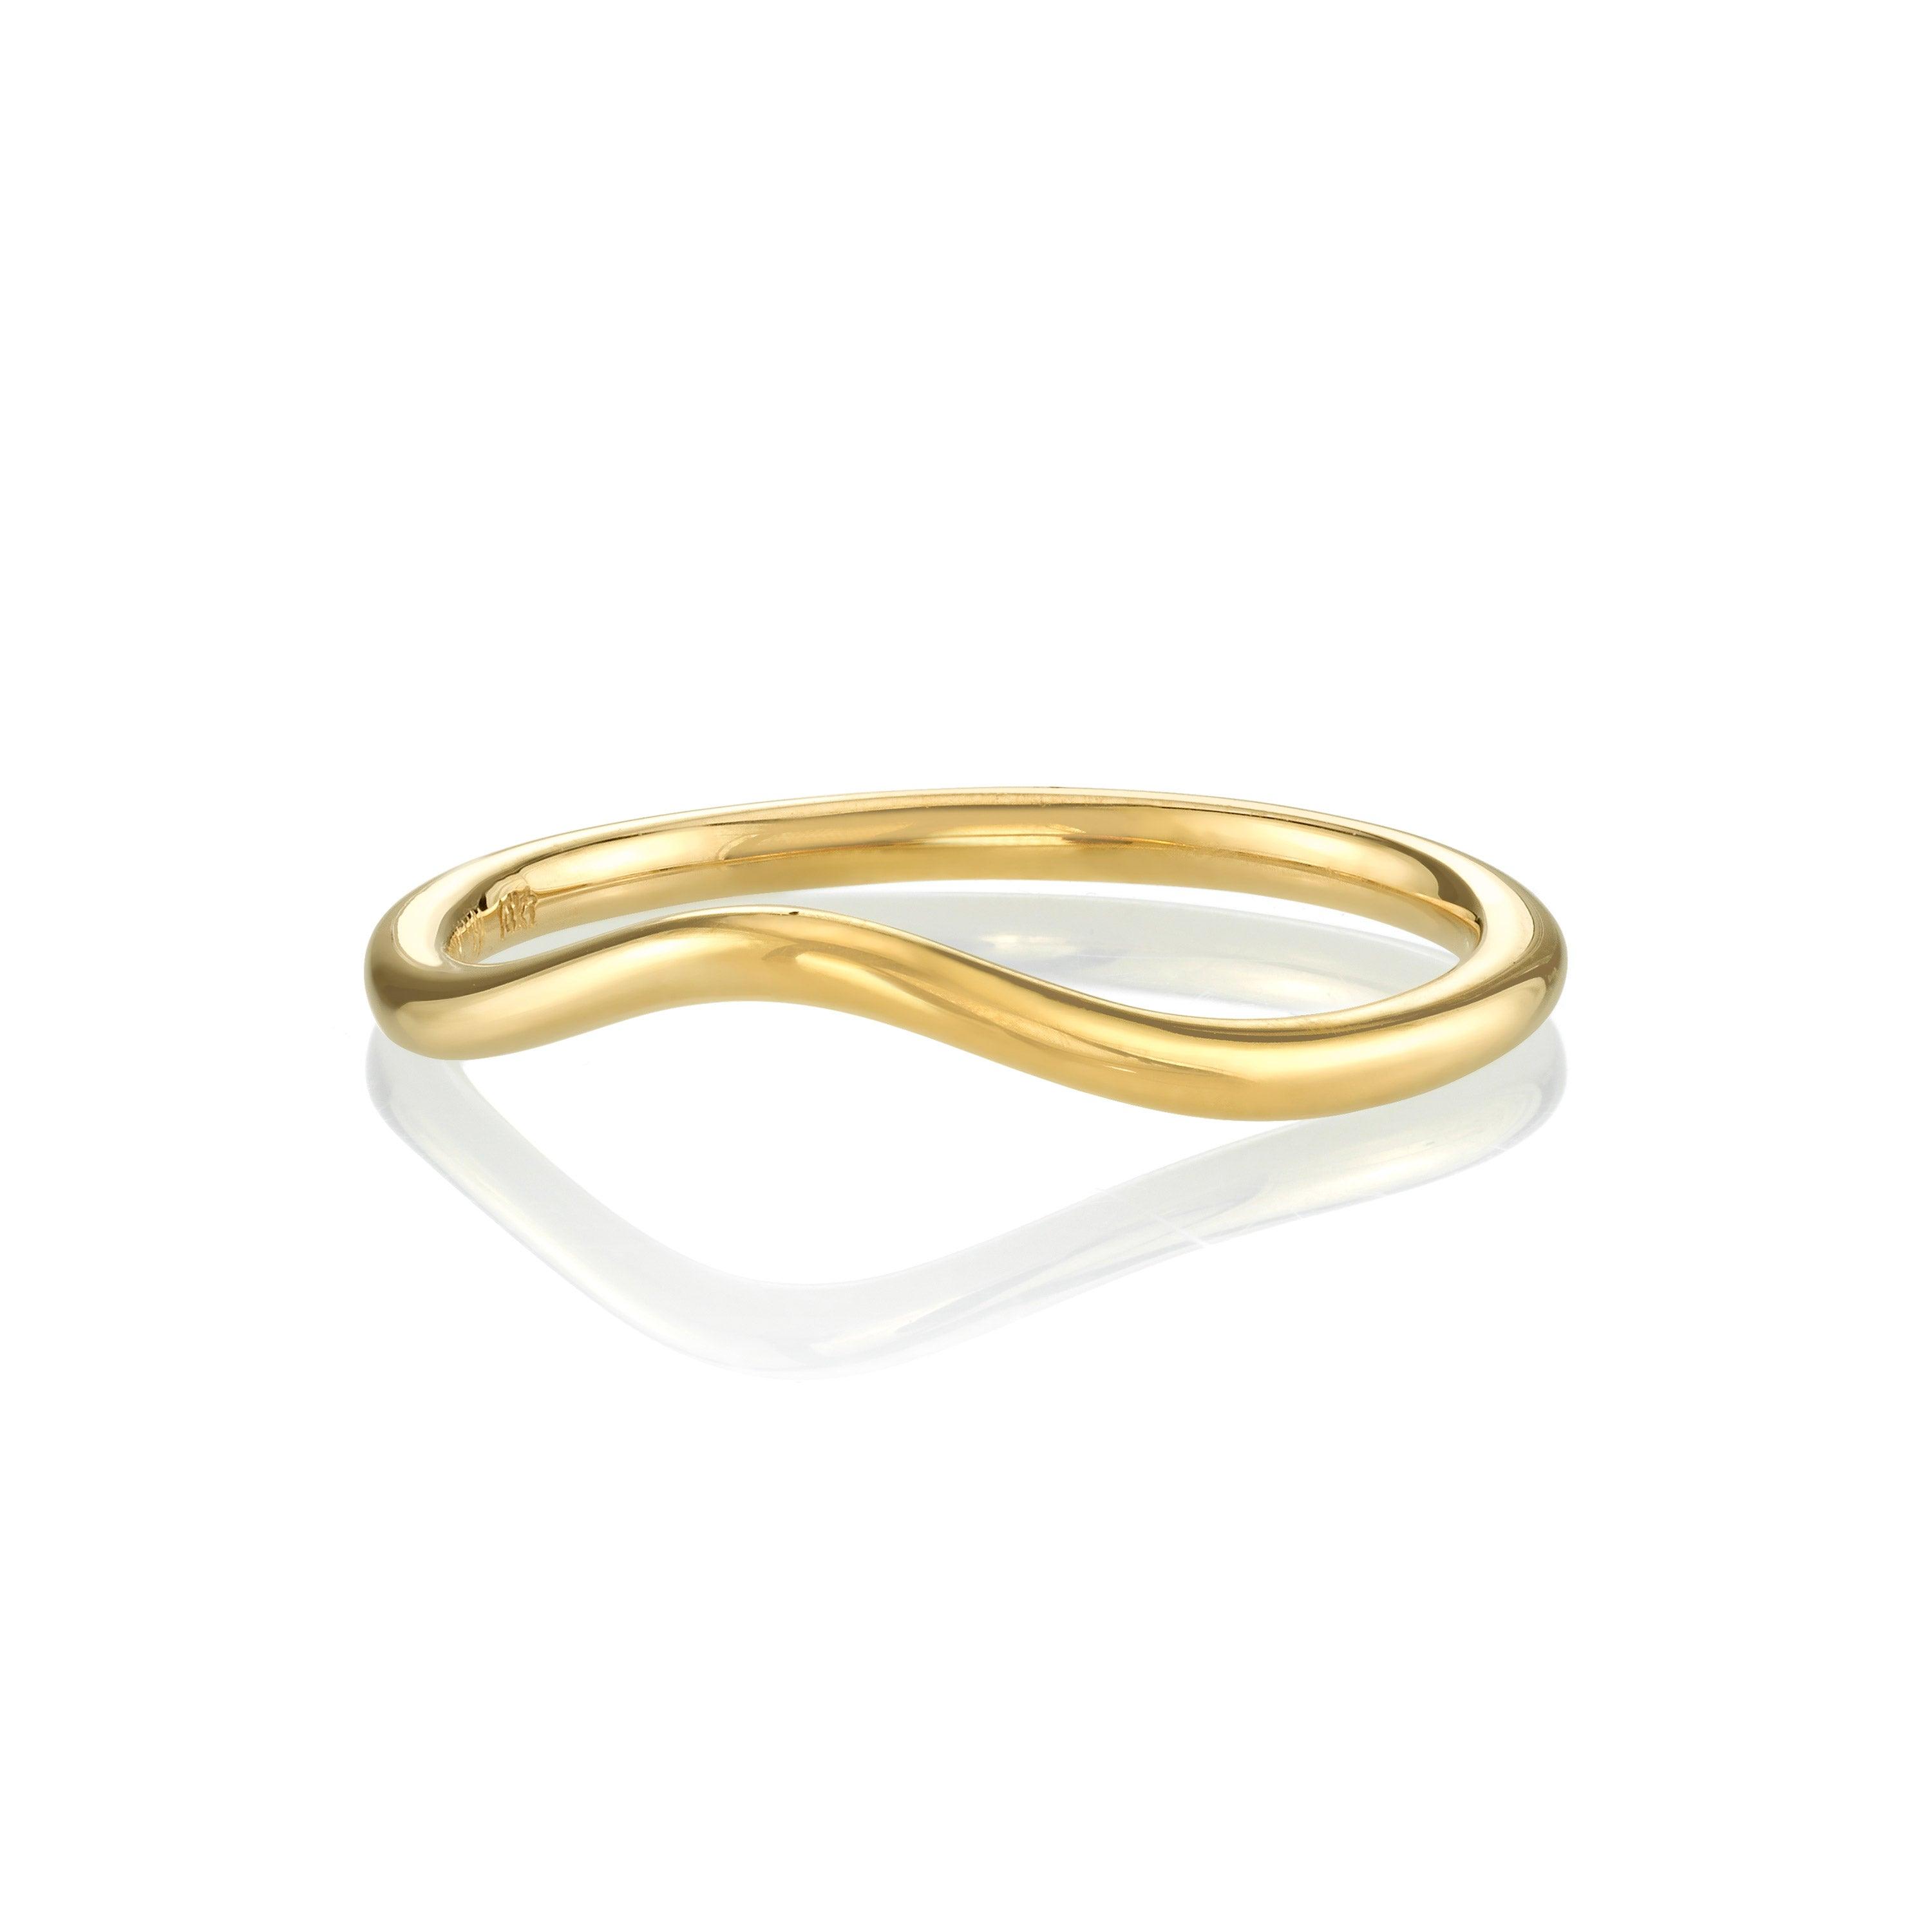 Marrow Fine Jewelry Dainty Everyday Wave Shaped Stacking Band Ring